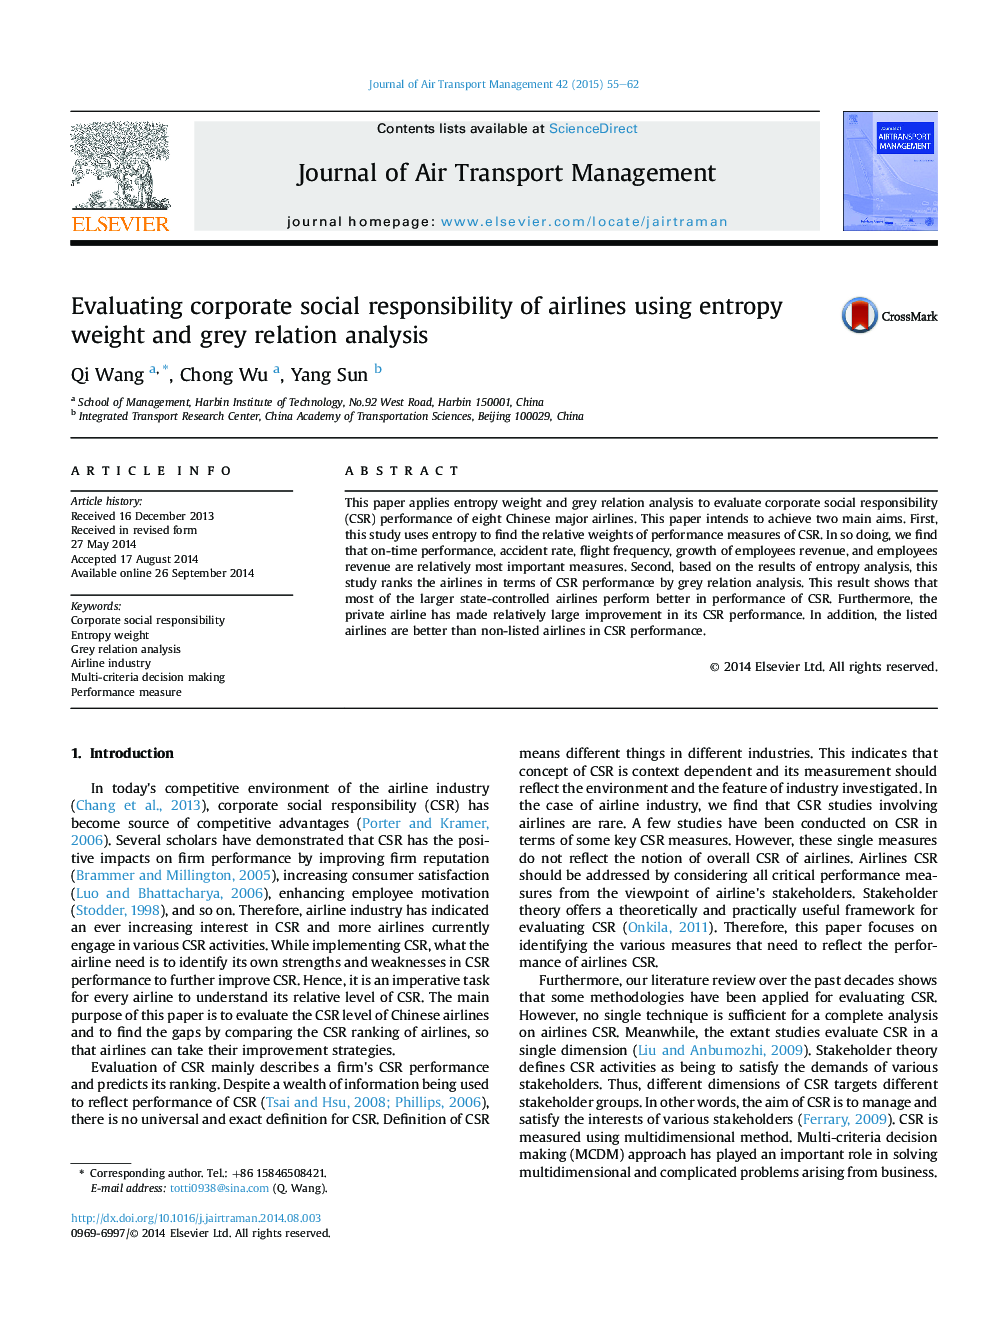 Evaluating corporate social responsibility of airlines using entropy weight and grey relation analysis